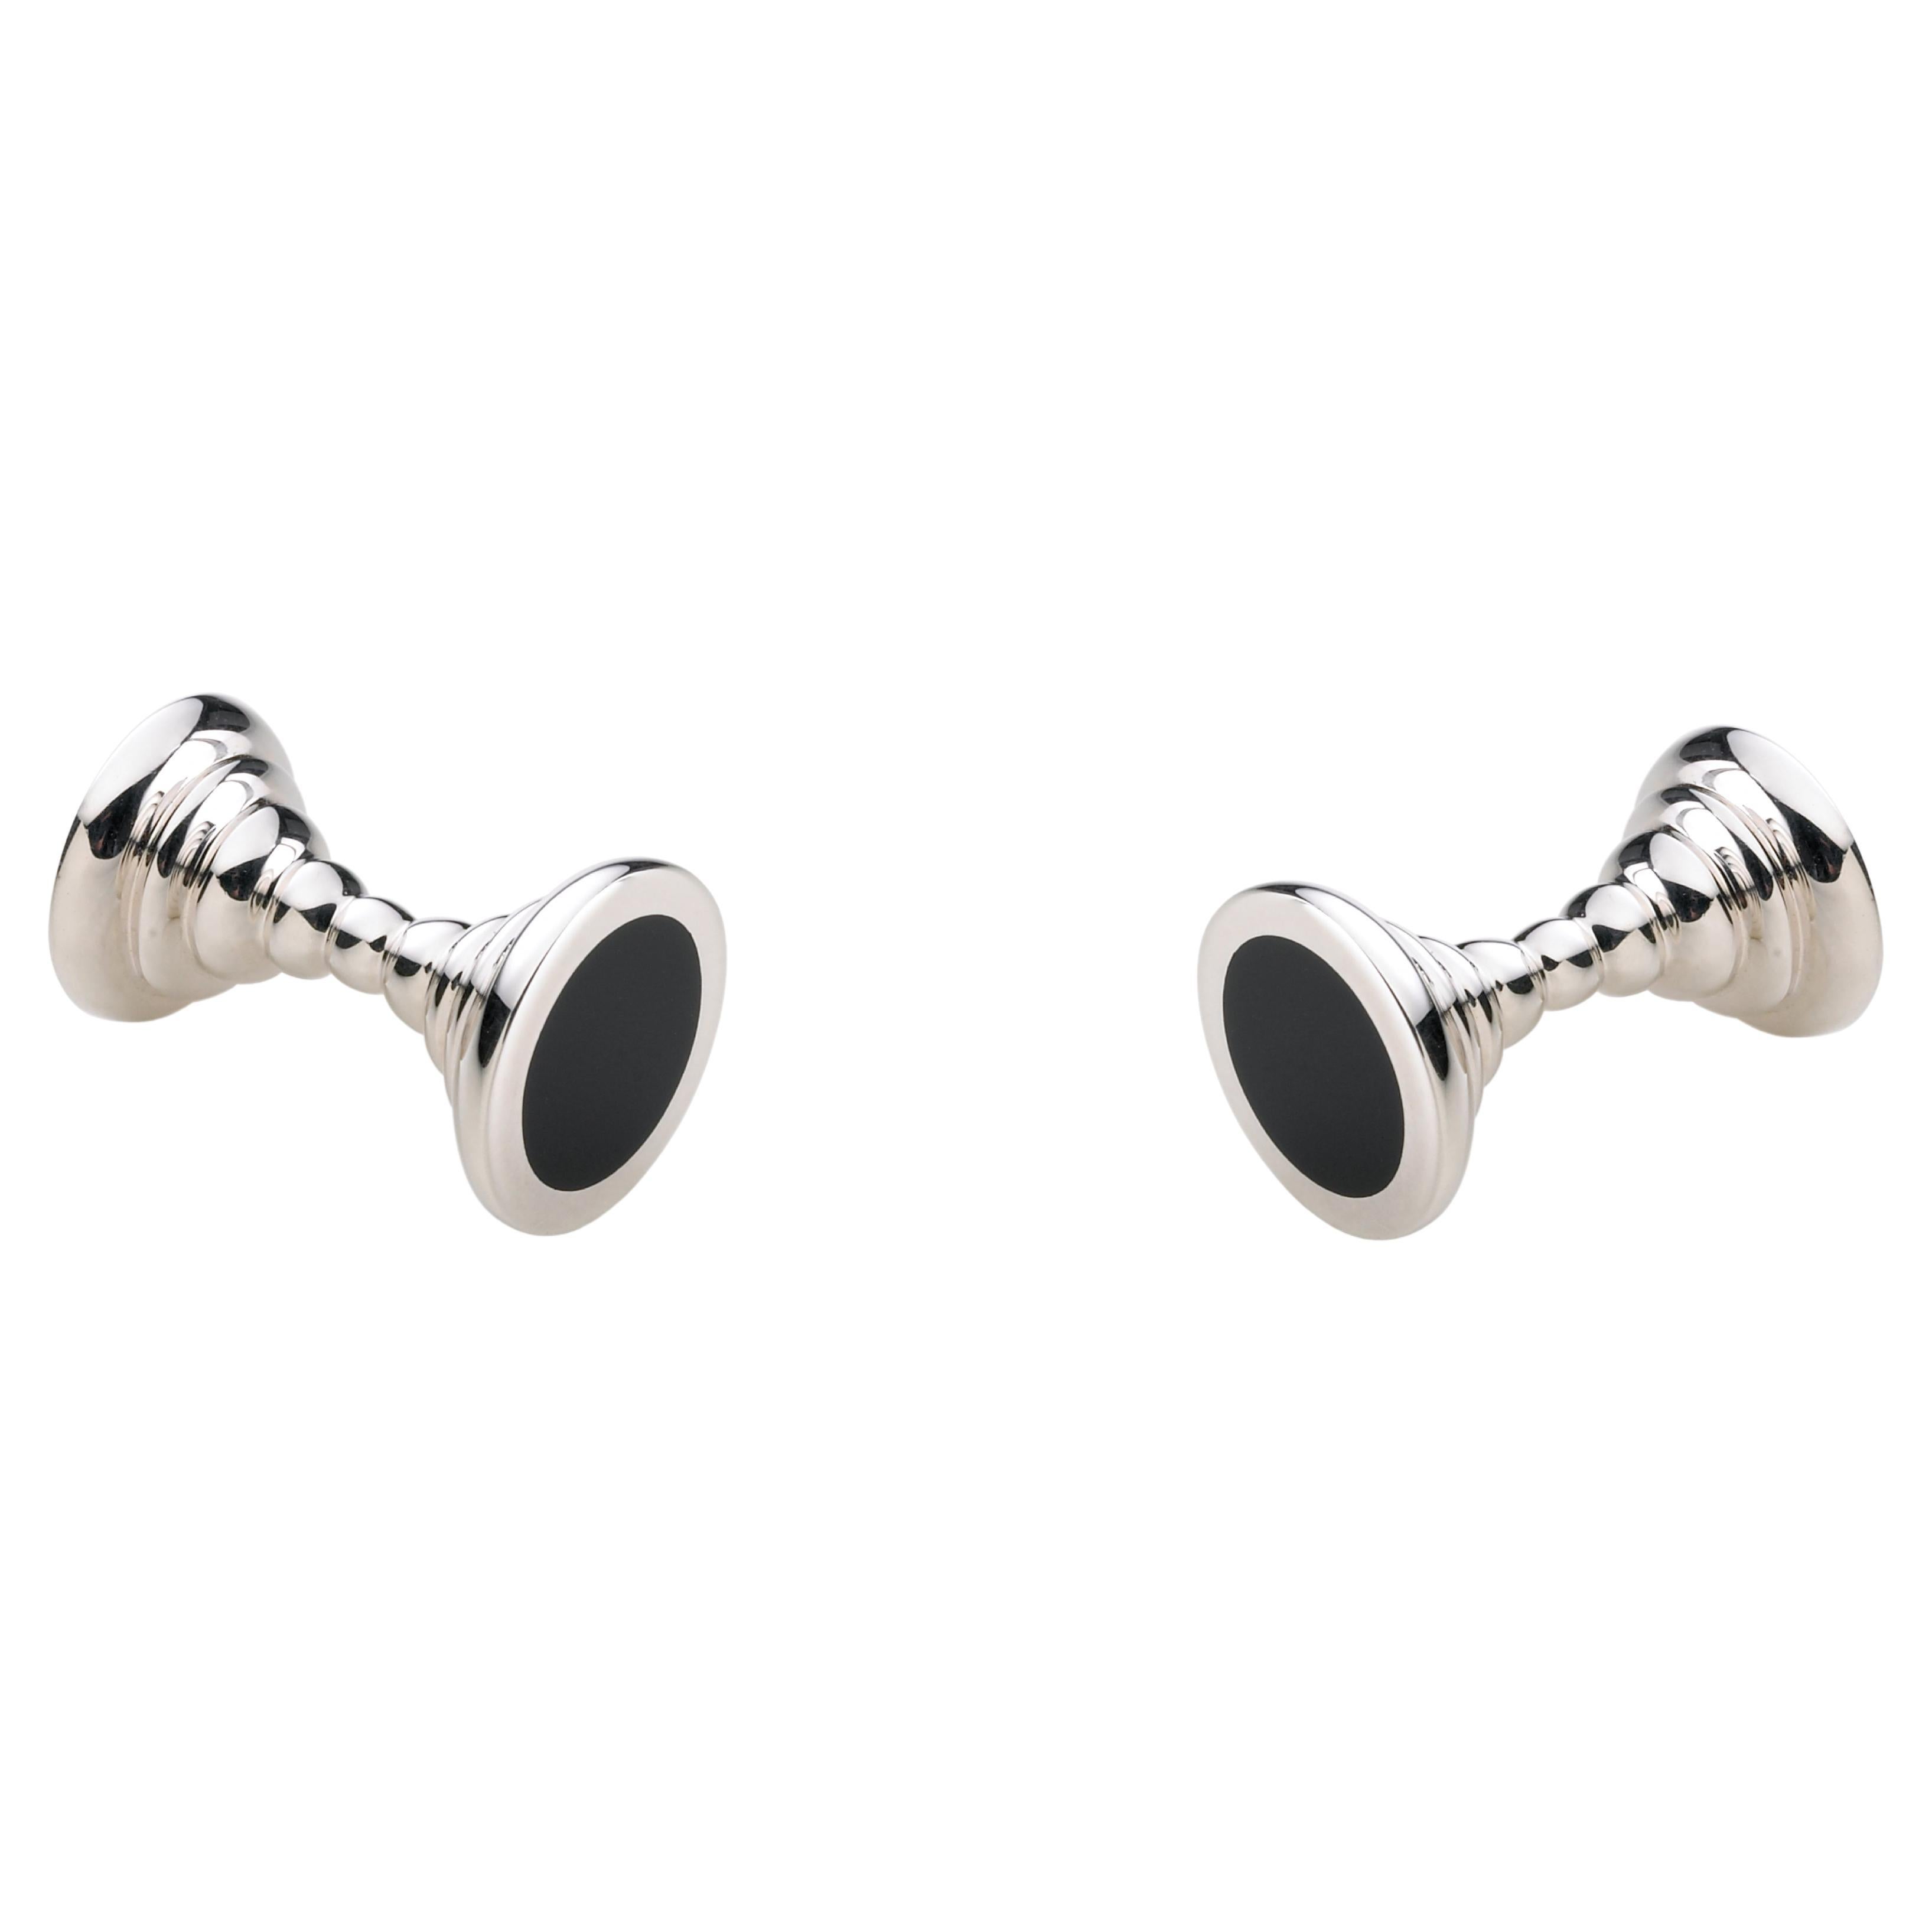 Deakin & Francis Sterling Silver Dumbbell Cufflinks with Onyx Inlay Ends For Sale